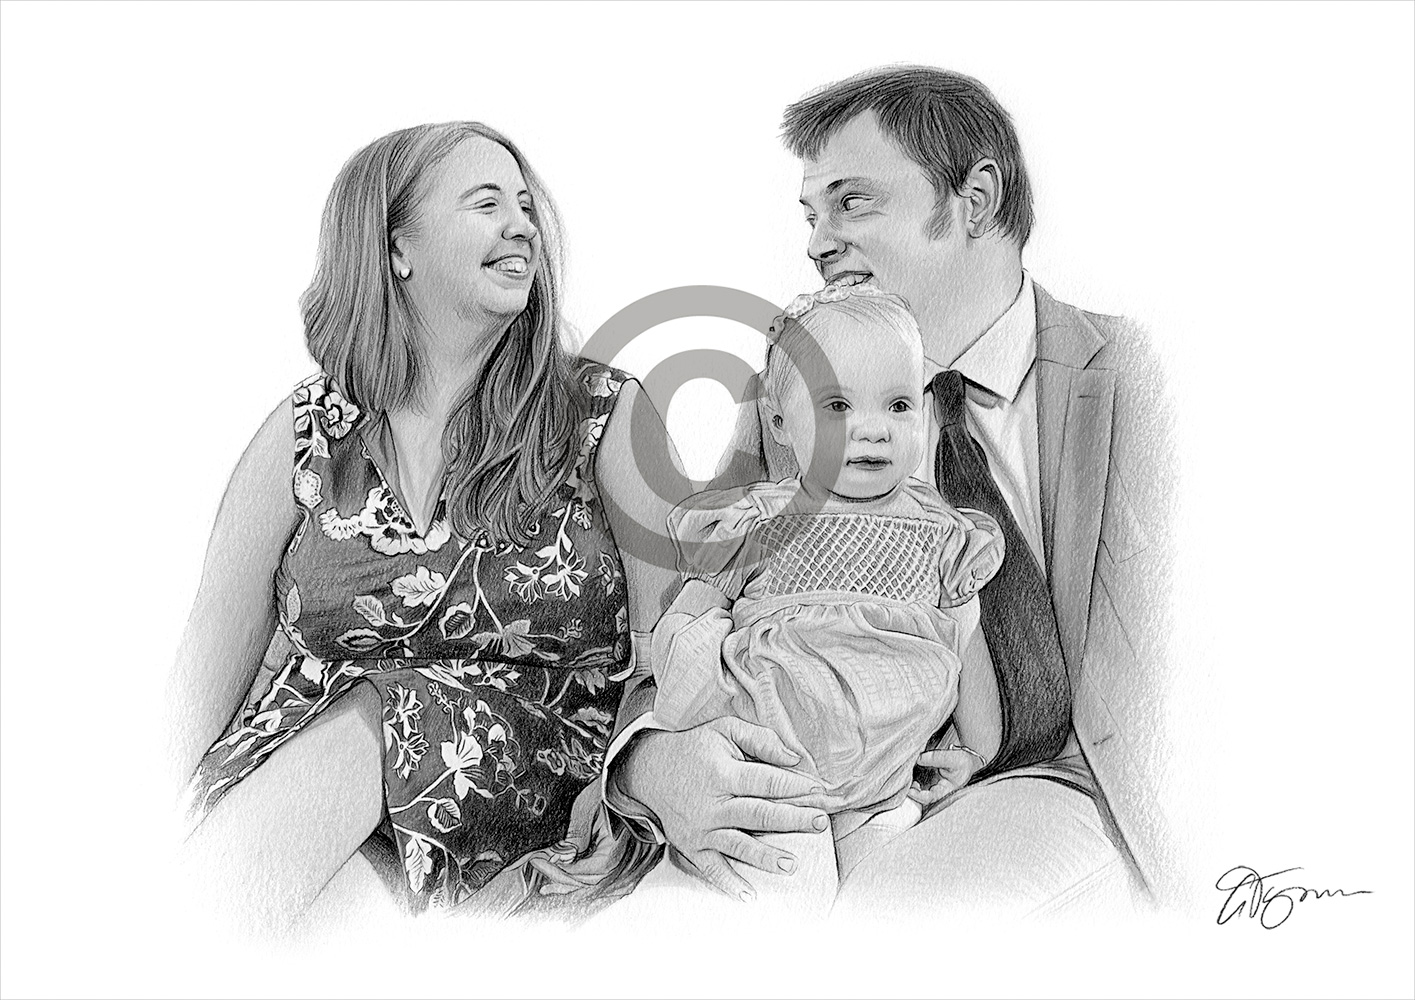 Pencil drawing commission of a family and baby by artist Gary Tymon